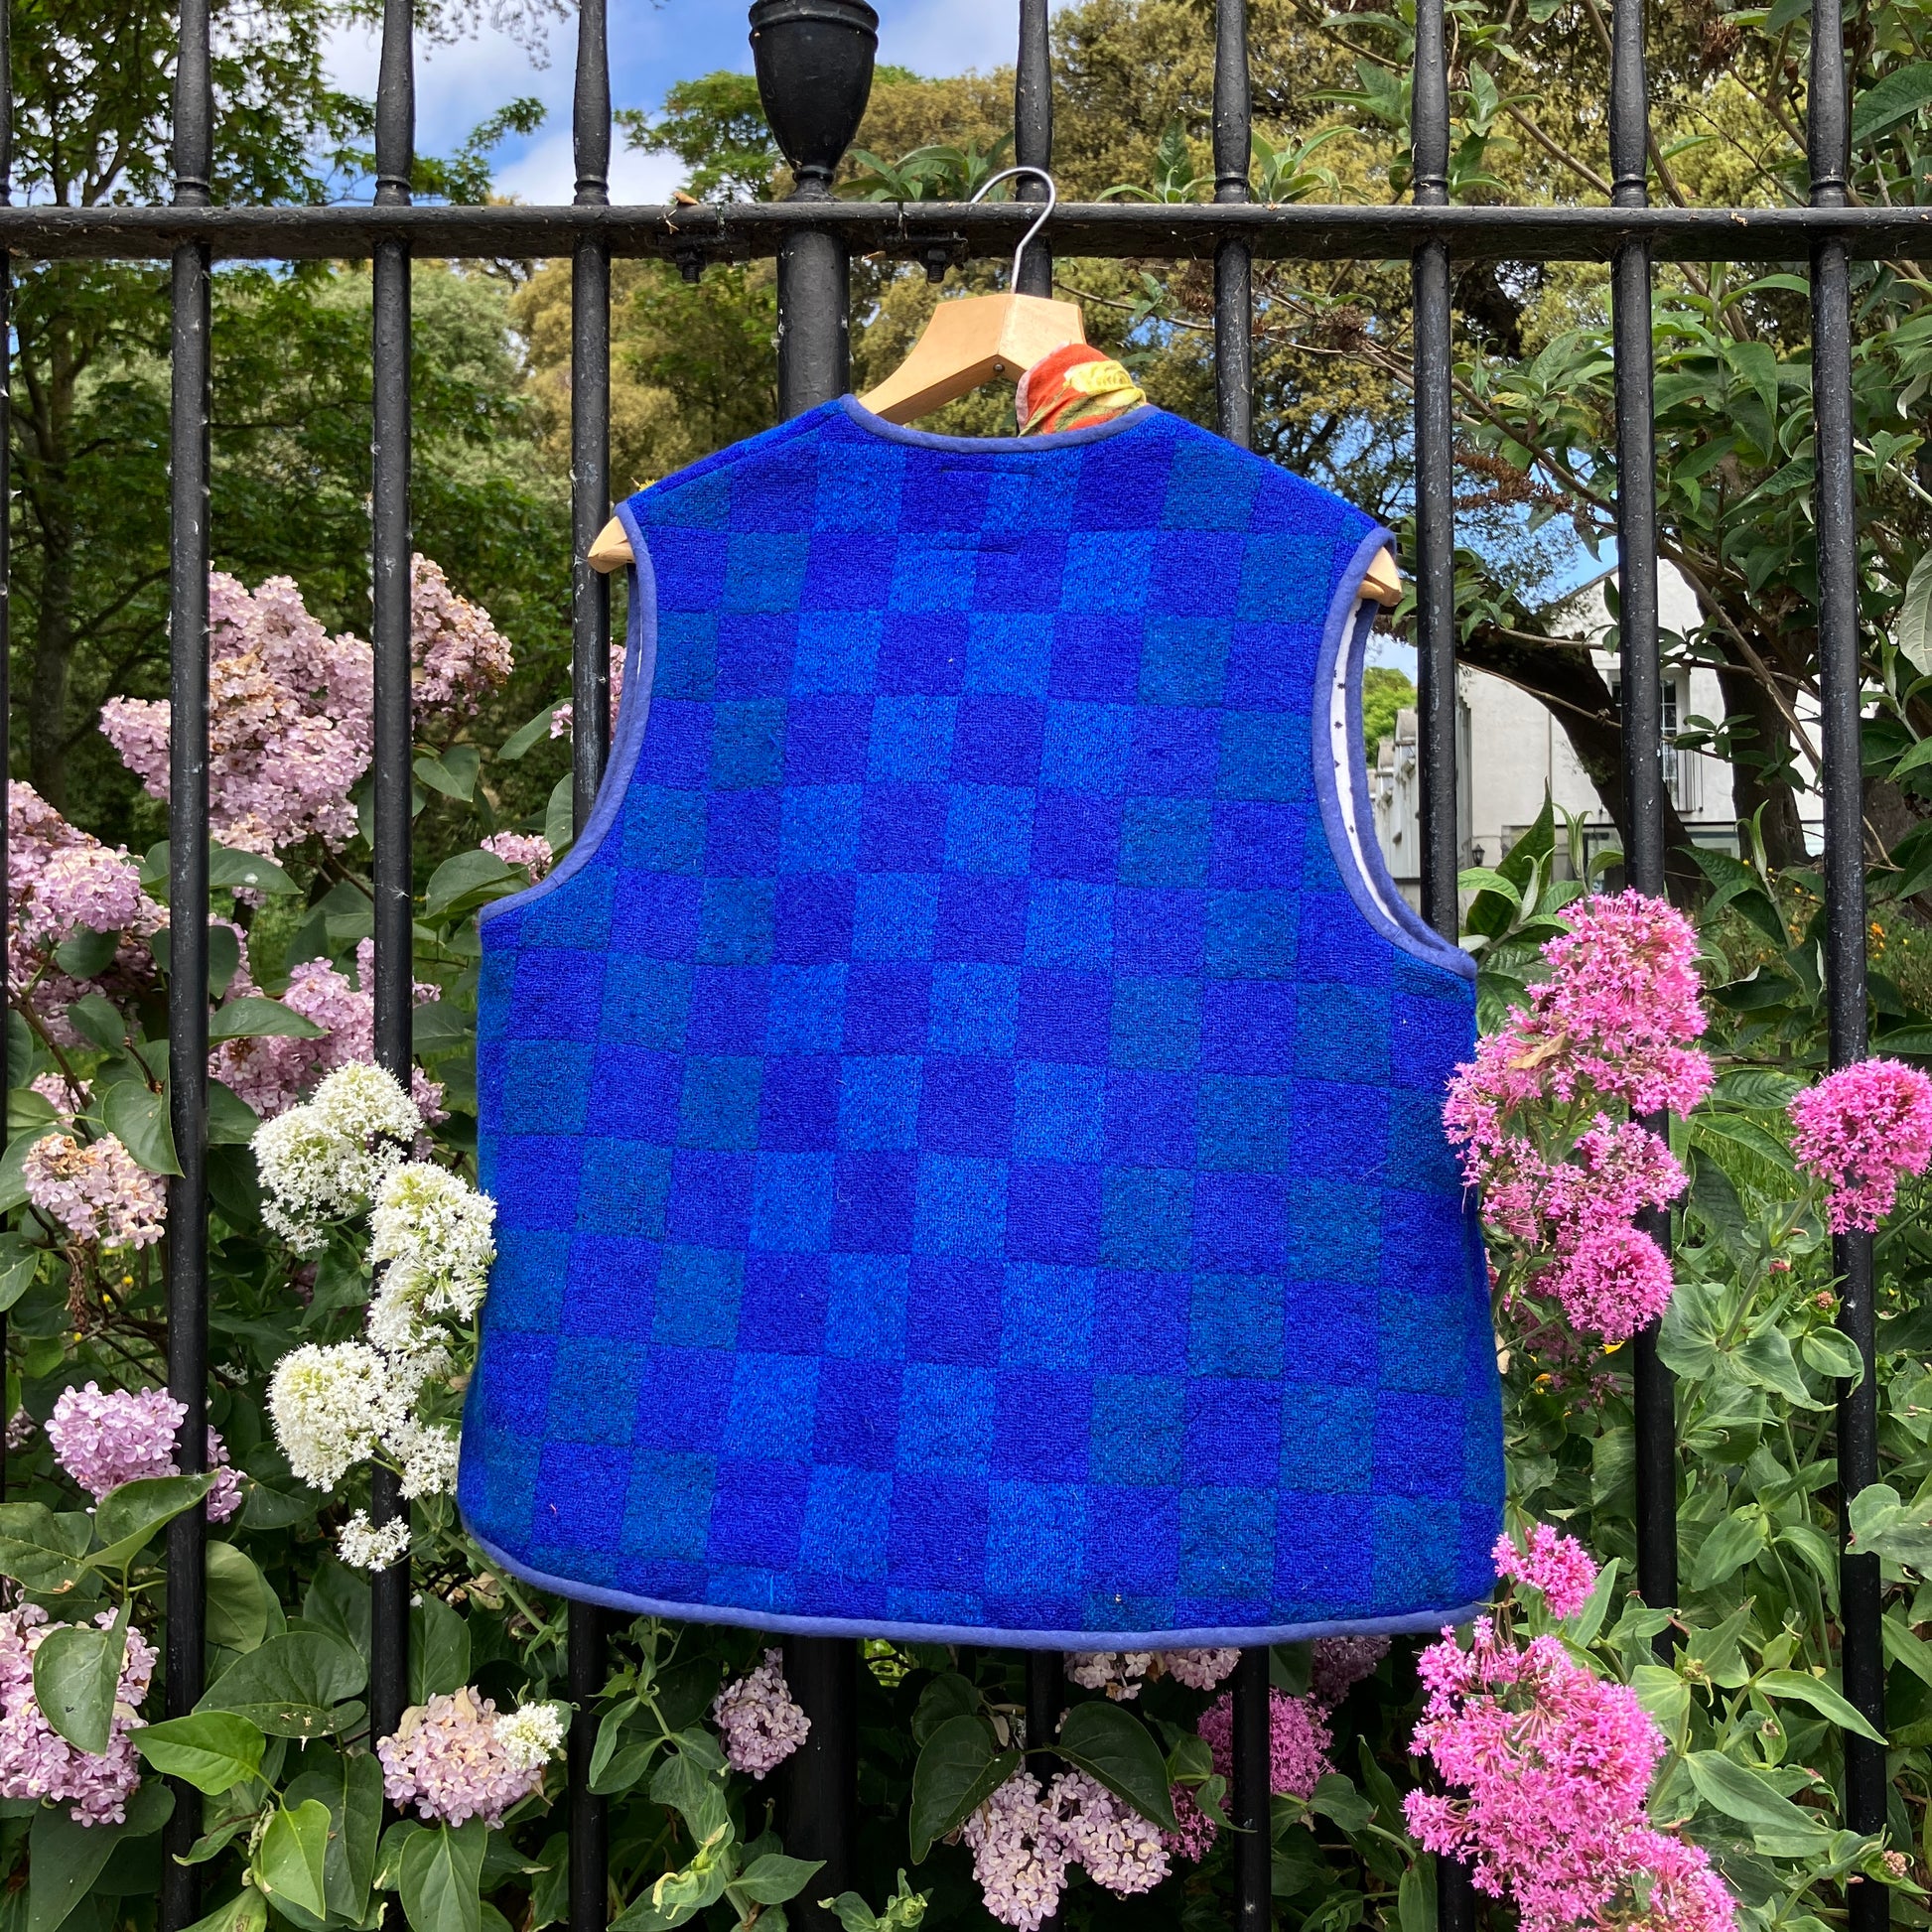 Vest/gilet/waistcoat made from a reclaimed blue checkerboard weave Irish wool Gaiety blanket, photographed in front of a lilac bush (back view)